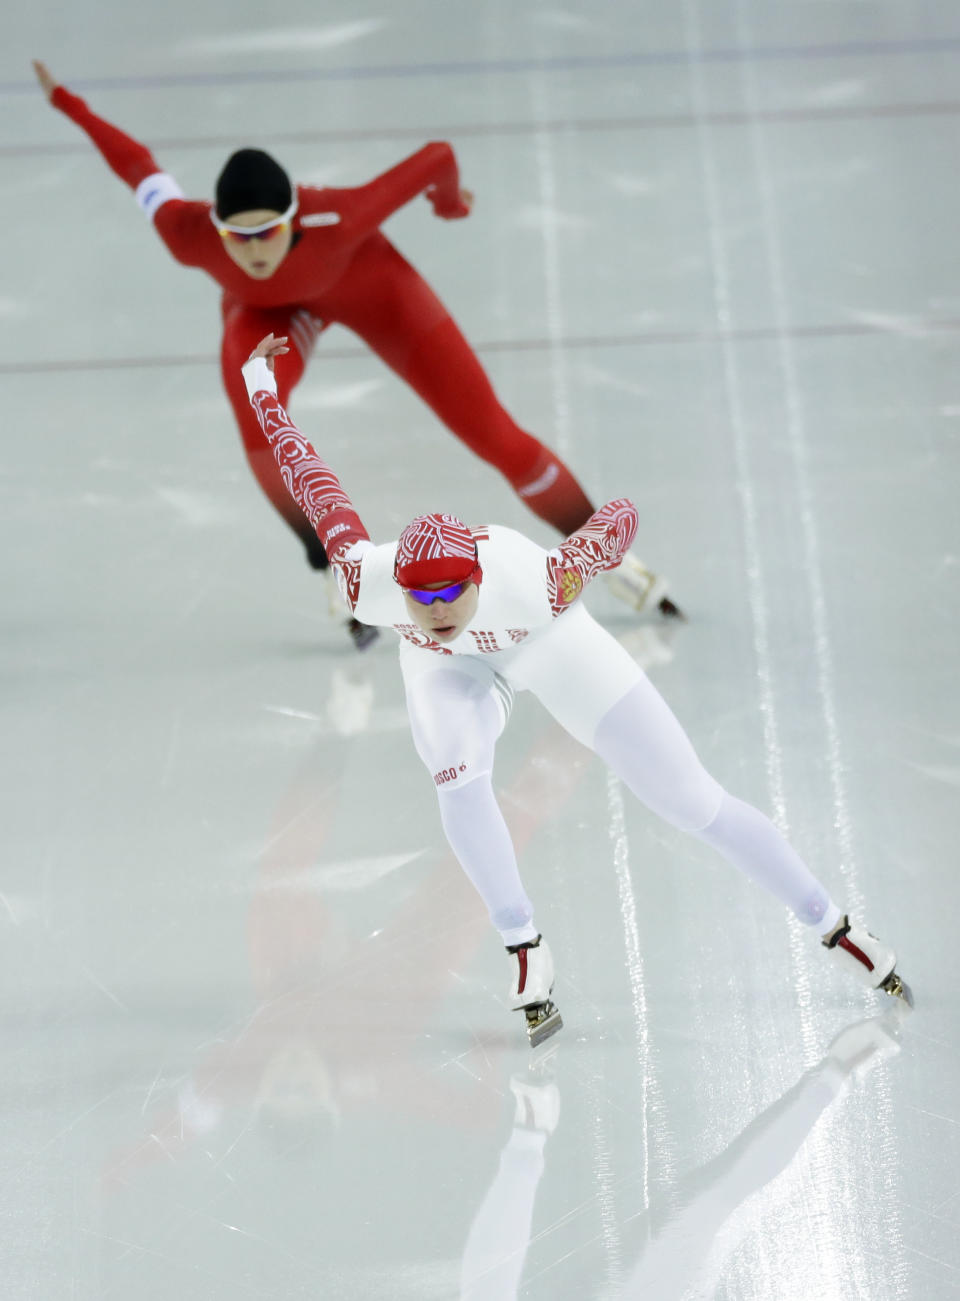 Norway's Hege Bokko, top, and Russia's Olga Fatkulina compete in the women's 1,500-meter race at the Adler Arena Skating Center during the 2014 Winter Olympics in Sochi, Russia, Sunday, Feb. 16, 2014. (AP Photo/David J. Phillip )